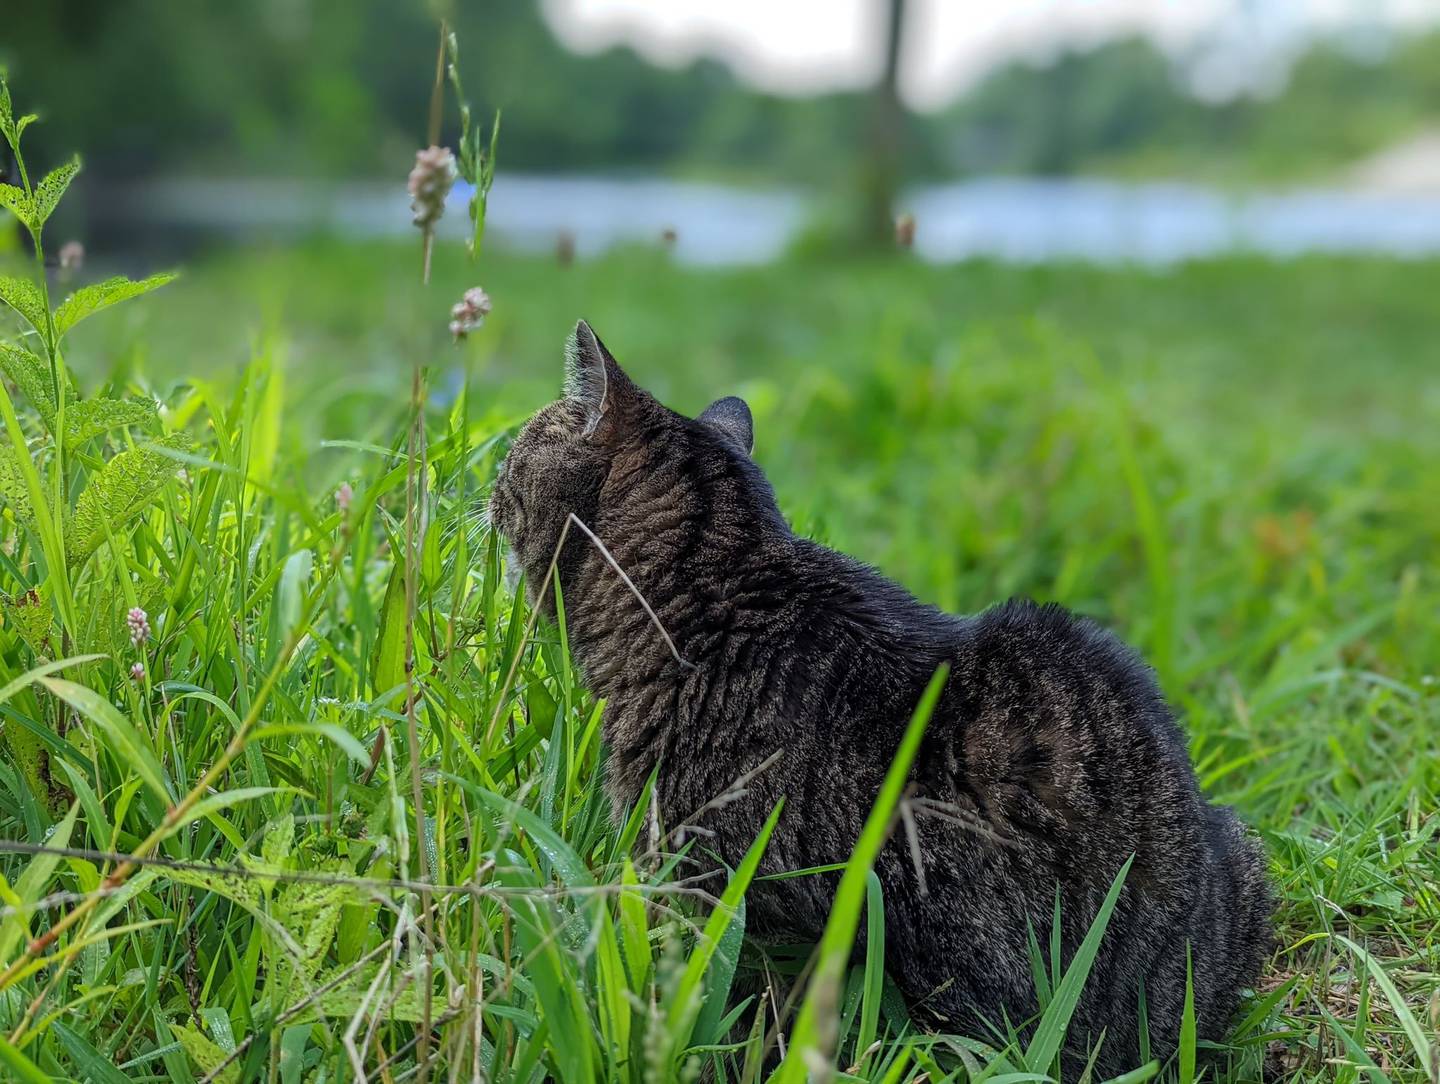 In 2005, a tabby kitten with a red collar and a jingle bell was often seen roaming near the I&M Canal towpath in Channahon. Here Frances is seen back at the canal 18 years later, one week before her death.